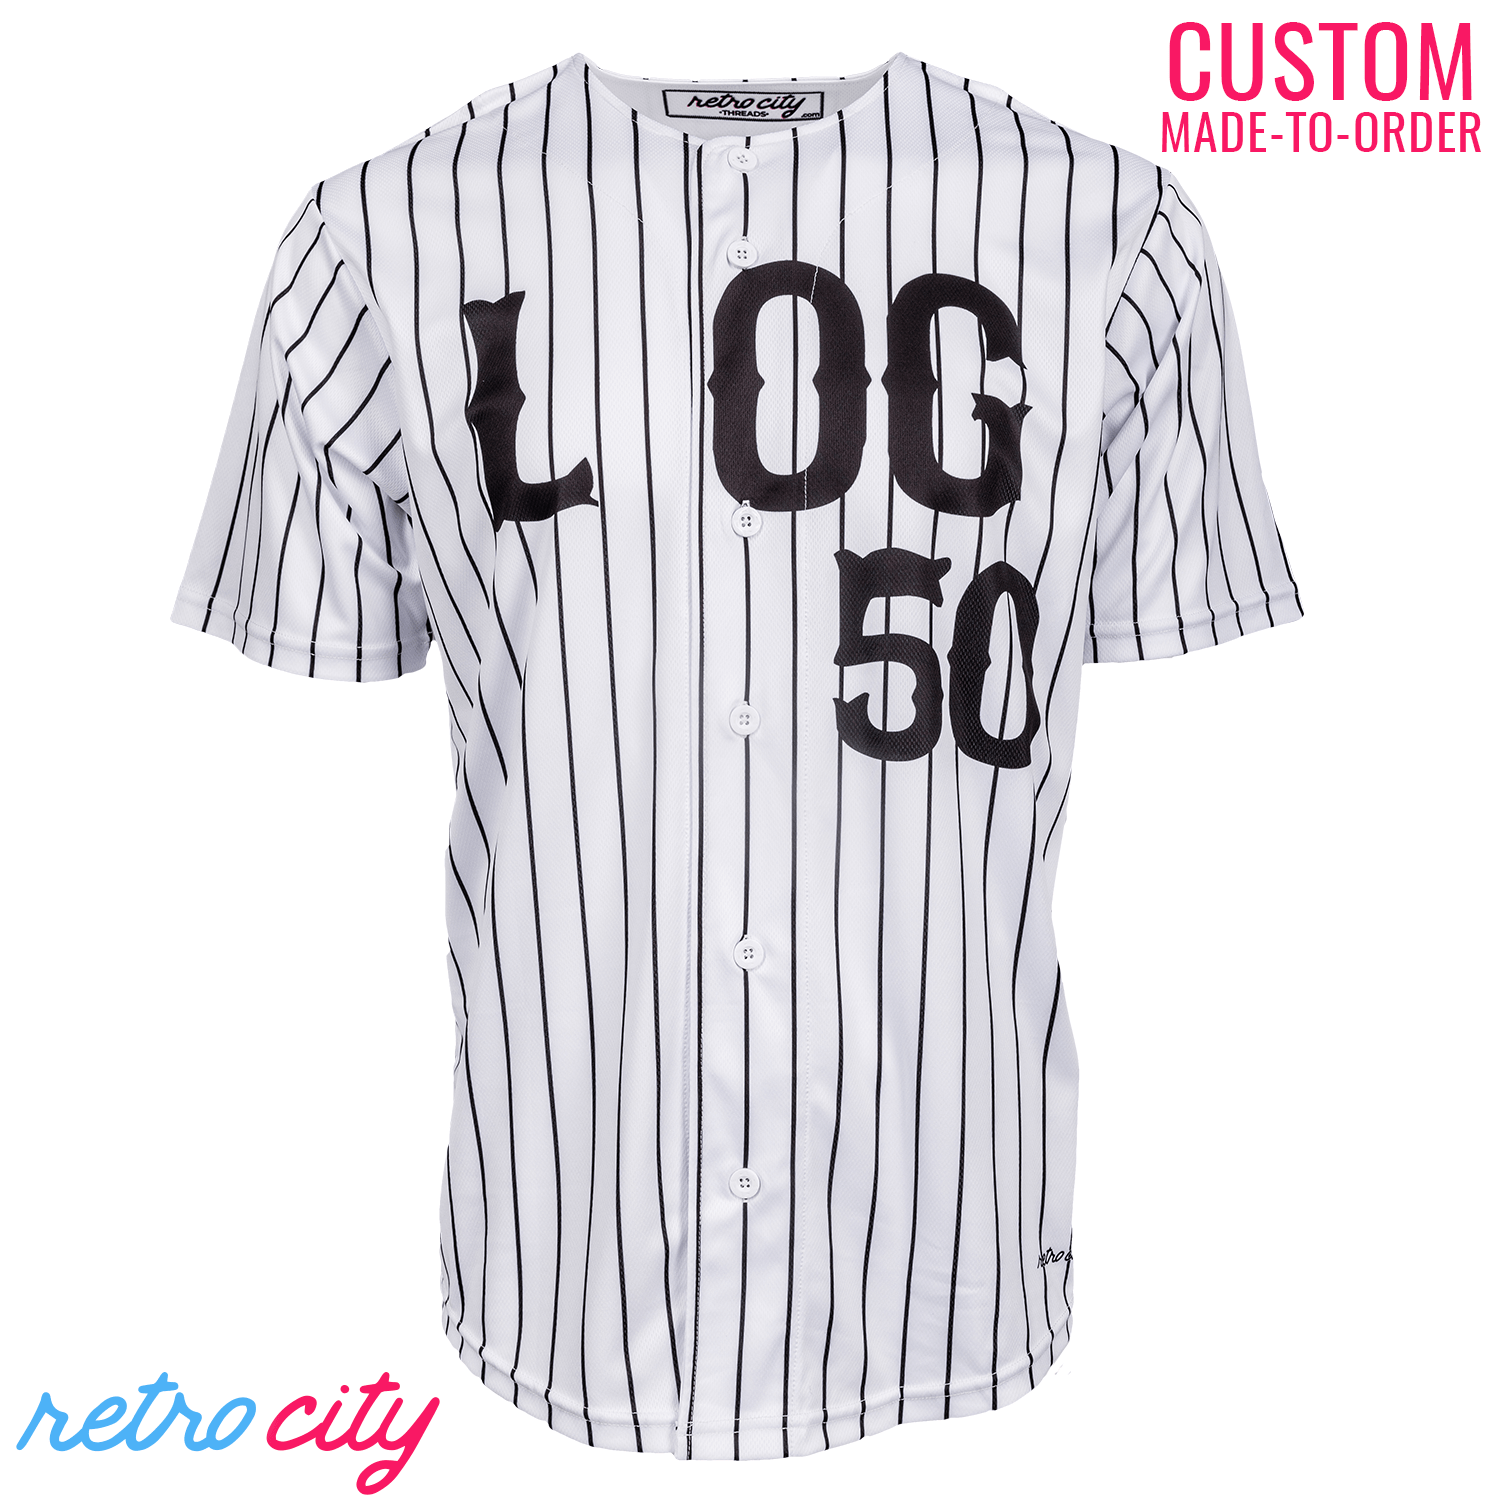 Kendall Roy Succession 'L to the OG' Pinstripe Full-Button Baseball Jersey